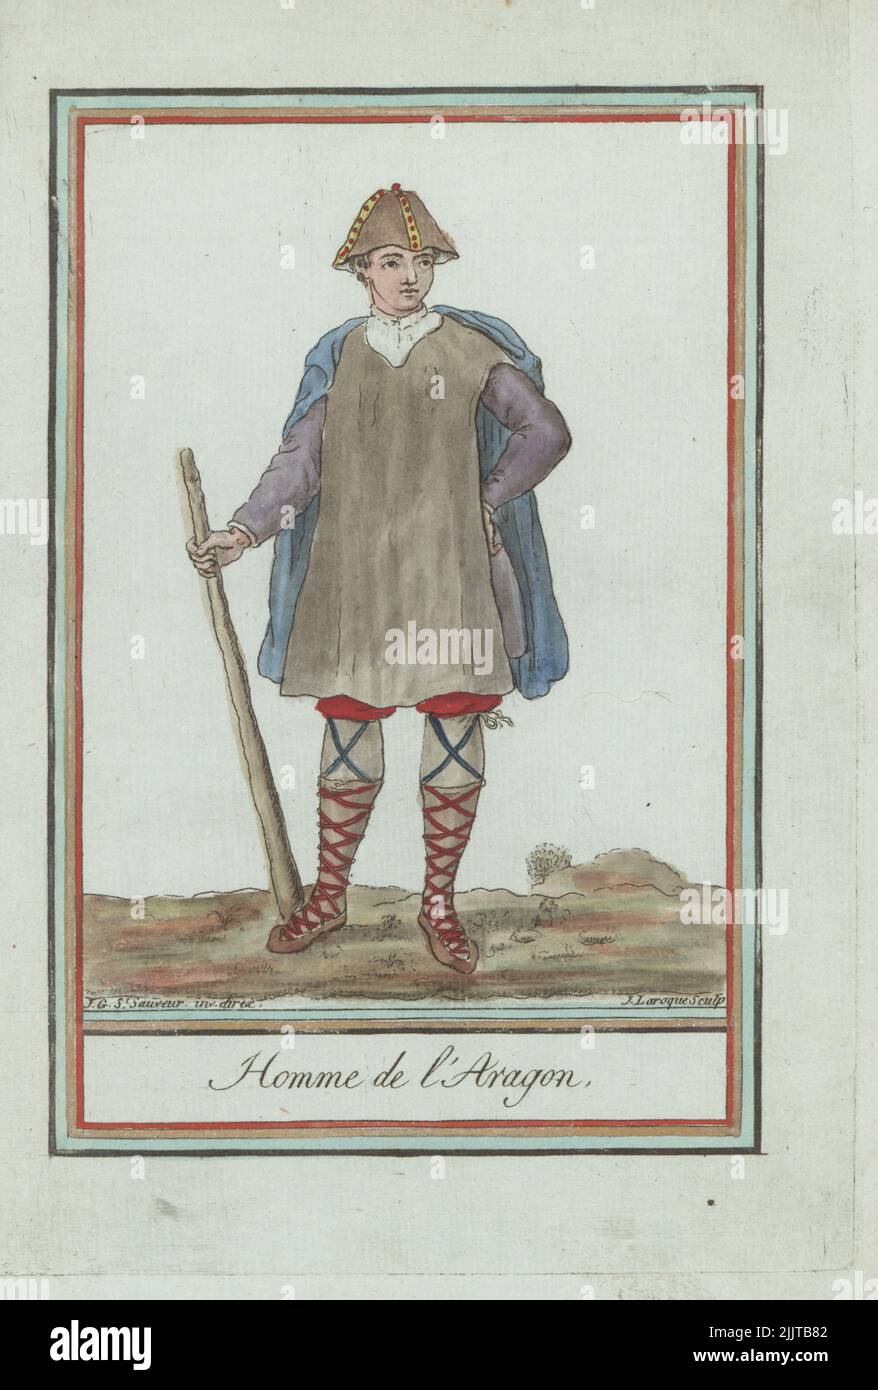 Man of Aragon, Spain. In conical hat decorated with ribbons, wool tunic over a jerkin, short cape, culottes, gaiters and shoes, holding a cudgel. Homme de l'Aragon. Handcoloured copperplate engraving by J. Laroque after a design by Jacques Grasset de Saint-Sauveur from his Encyclopedie des voyages, Encyclopedia of Voyages, Bordeaux, France, 1792. Stock Photo